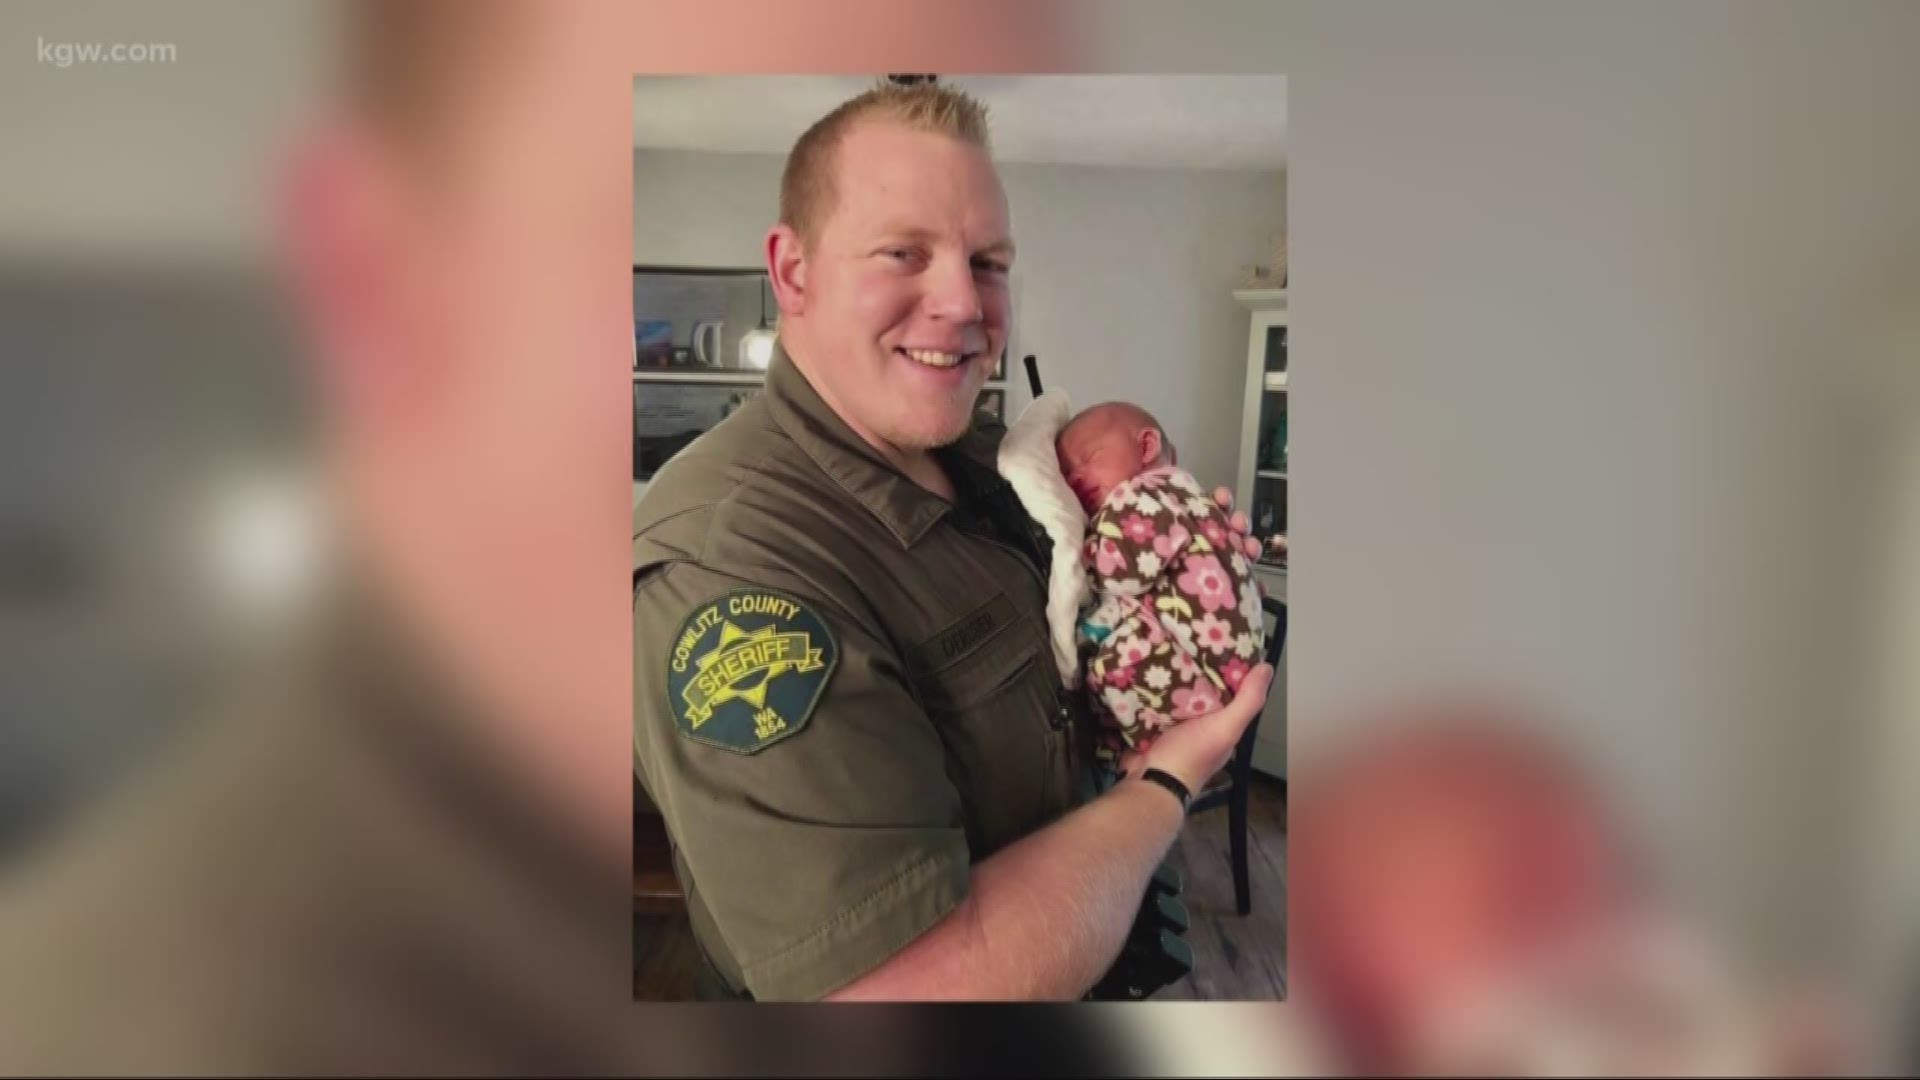 Law enforcement authories held a press conference at noon April 15, 2019 and offered more details on the shooting death of Cowlitz County deputy Justin Rosiers.